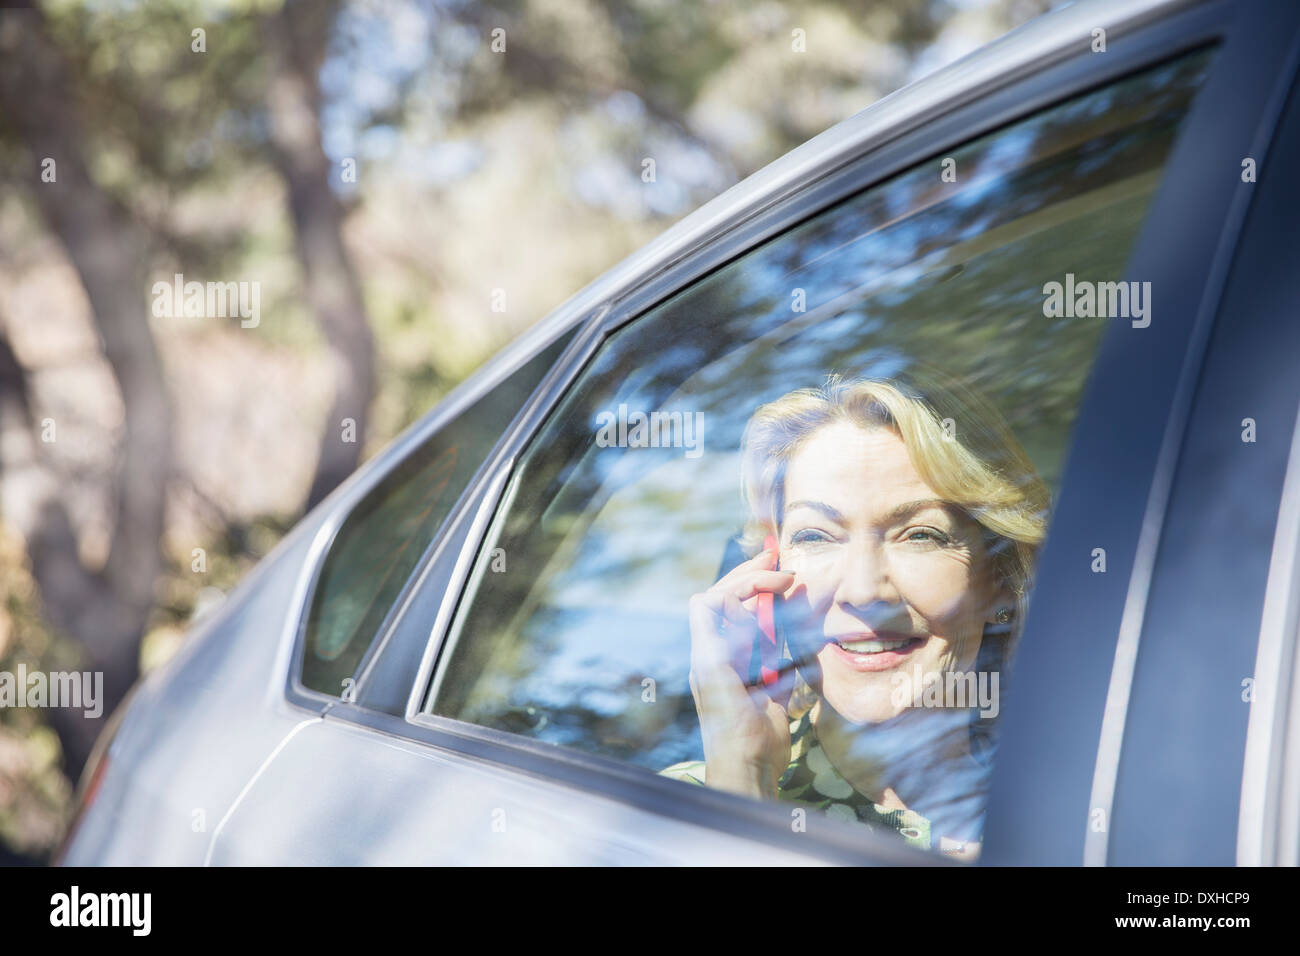 Senior woman talking on cell phone in car Stock Photo